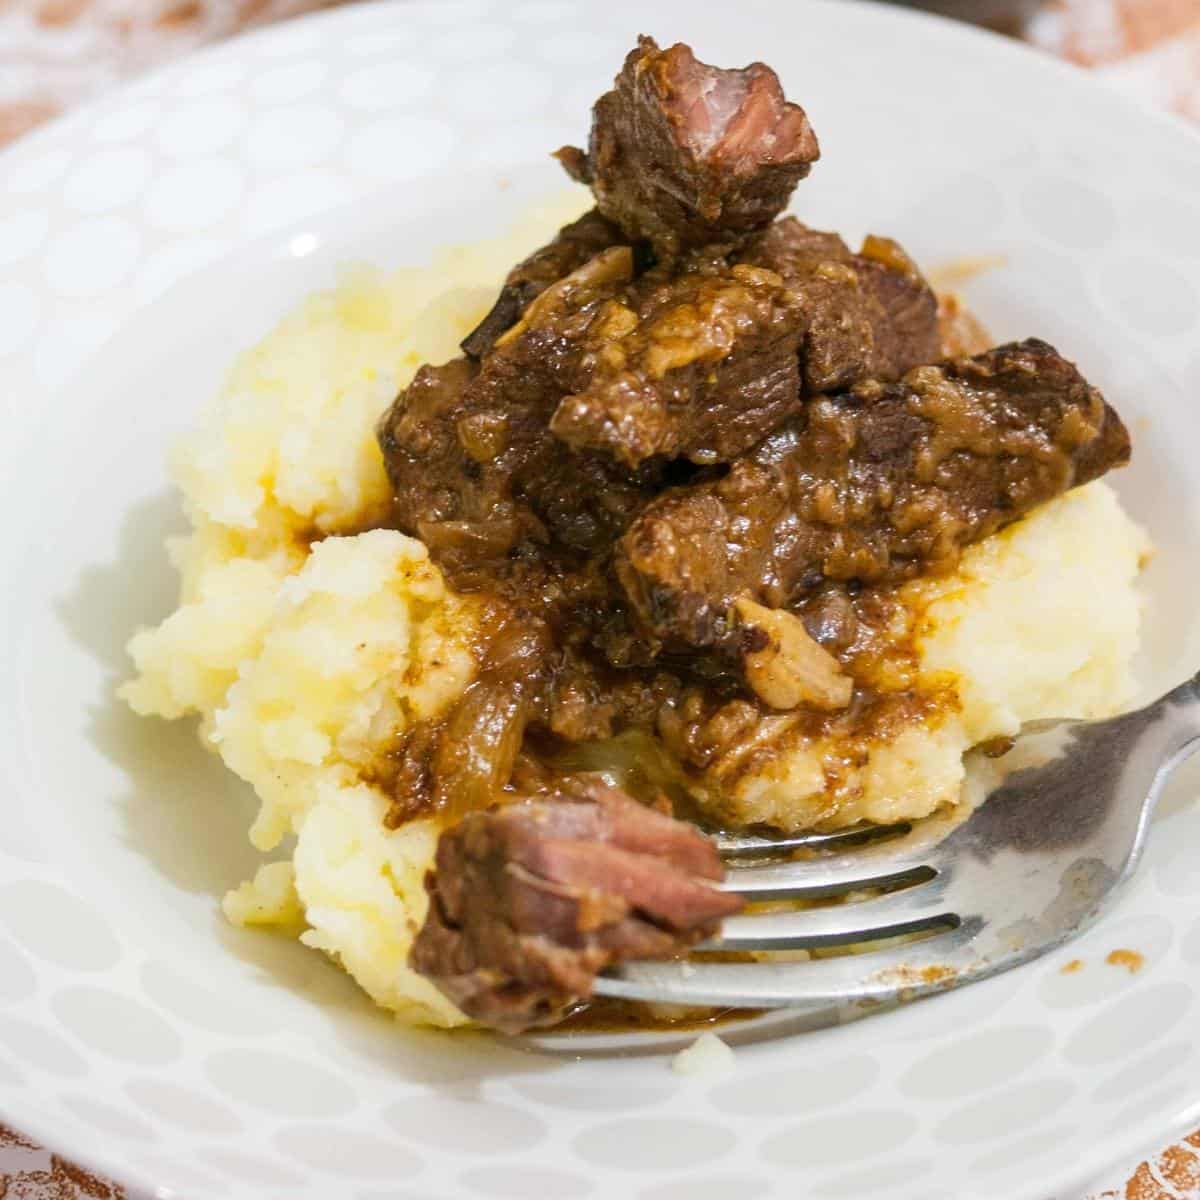 A plate of slow cooked beef with mashed potatoes.